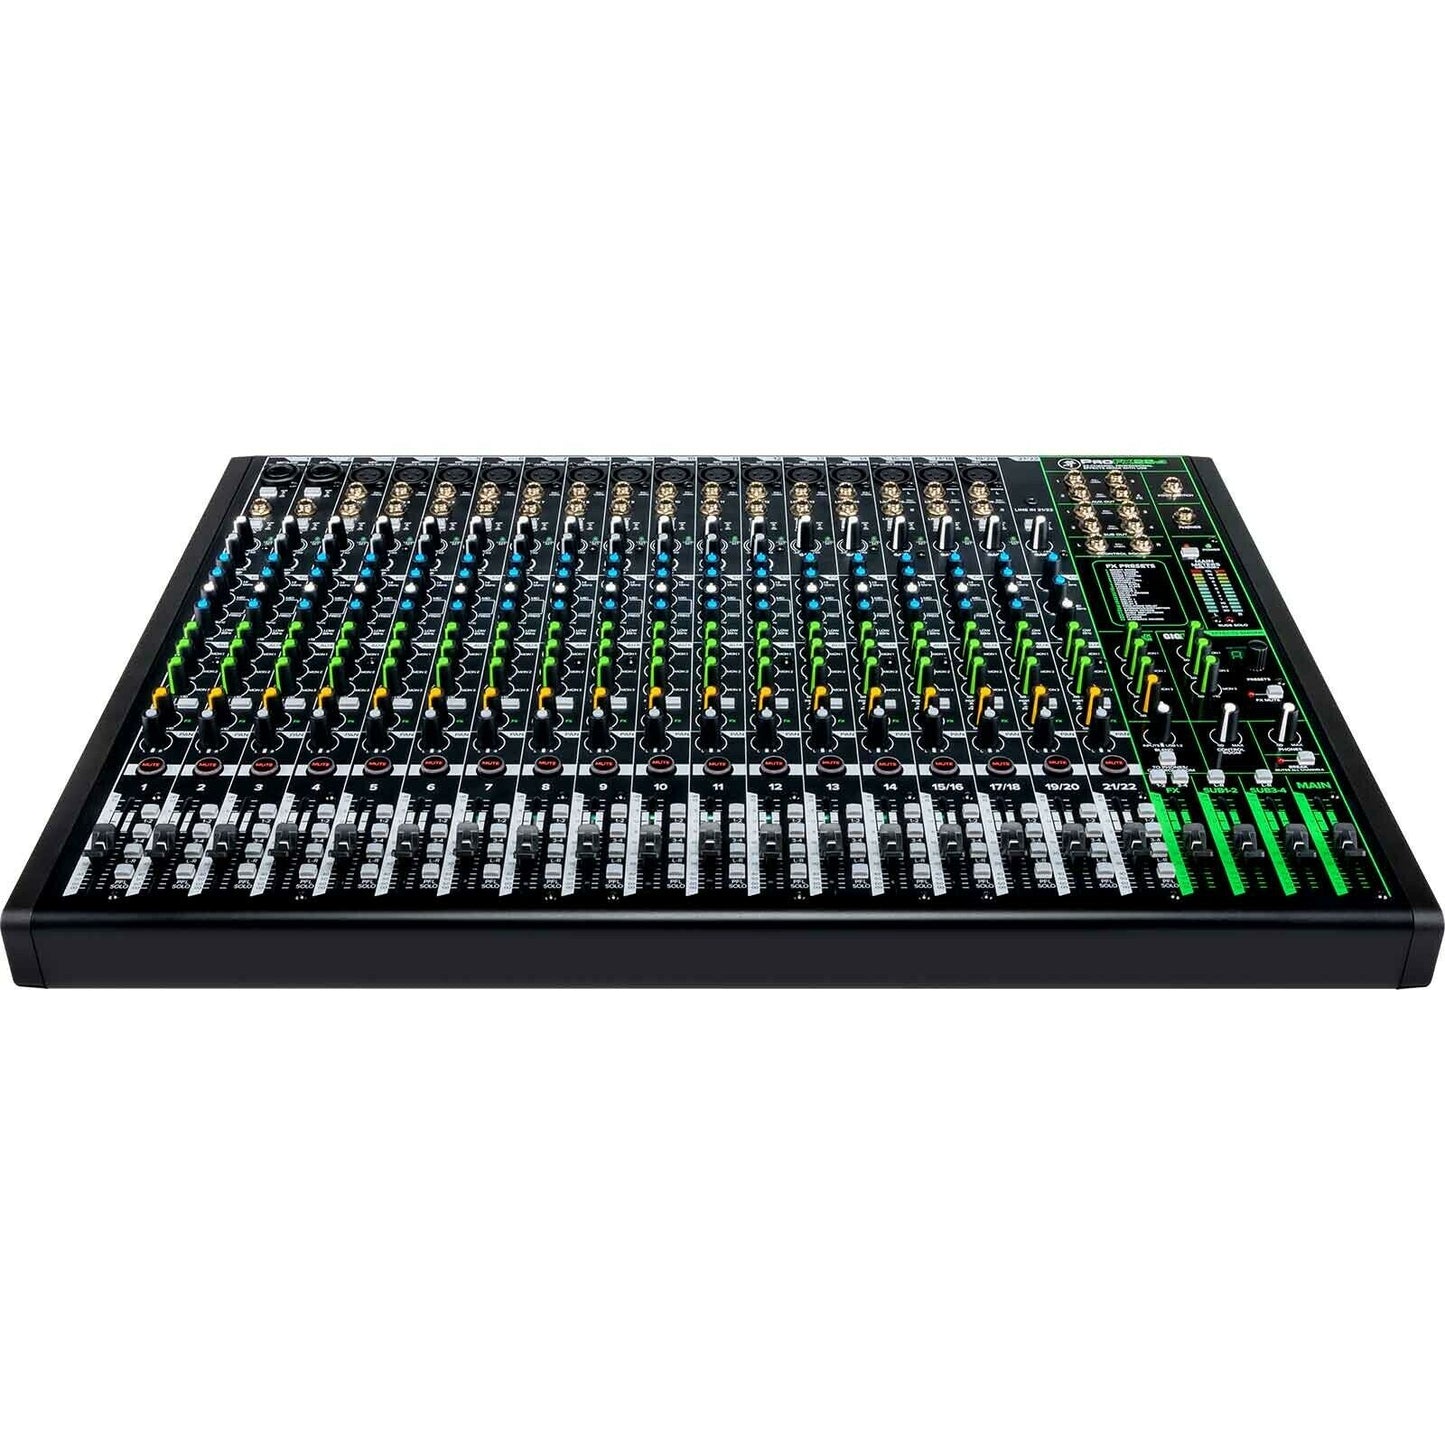 New - Mackie ProFX22v3 22-channel Mixer with USB and Effects